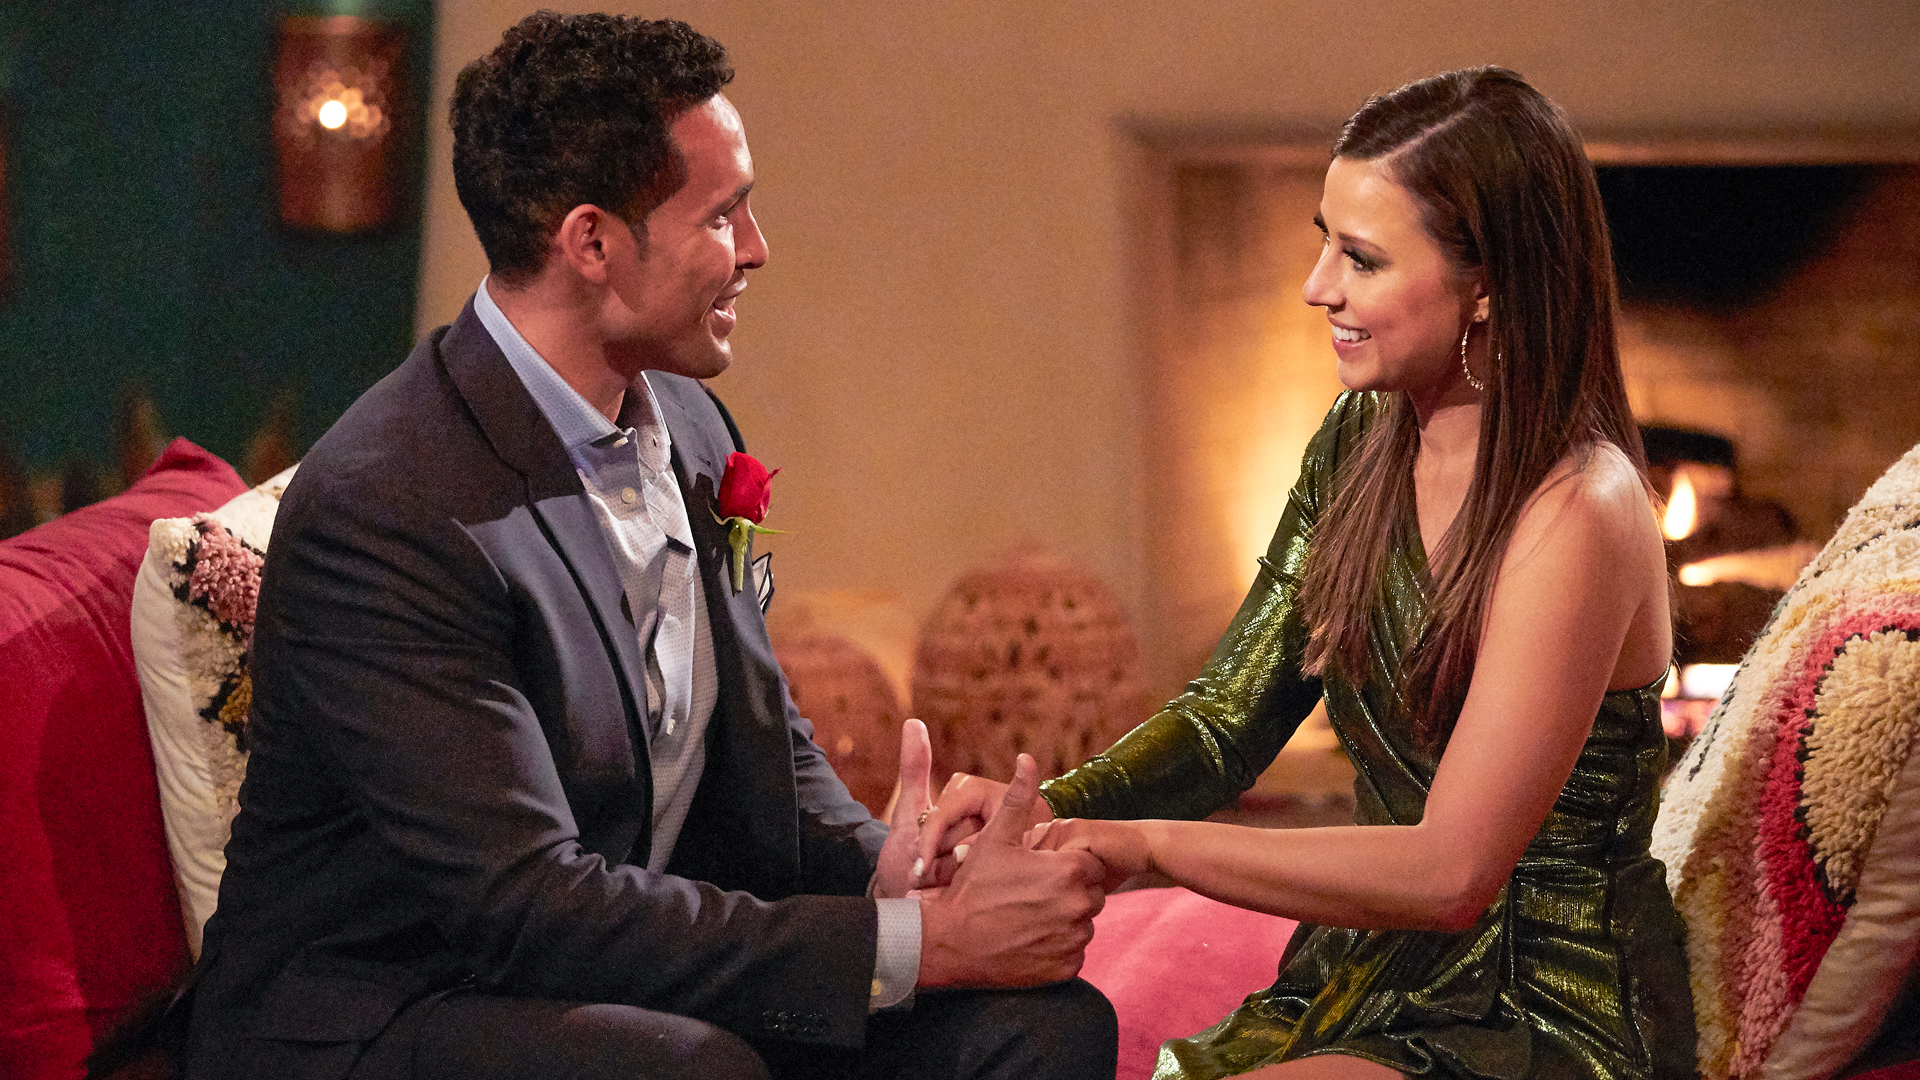 Thomas Jacobs and Katie Thurston talk before the rose ceremony in ‘The Bachelorette’ Season 17 Episode 3 in 2021